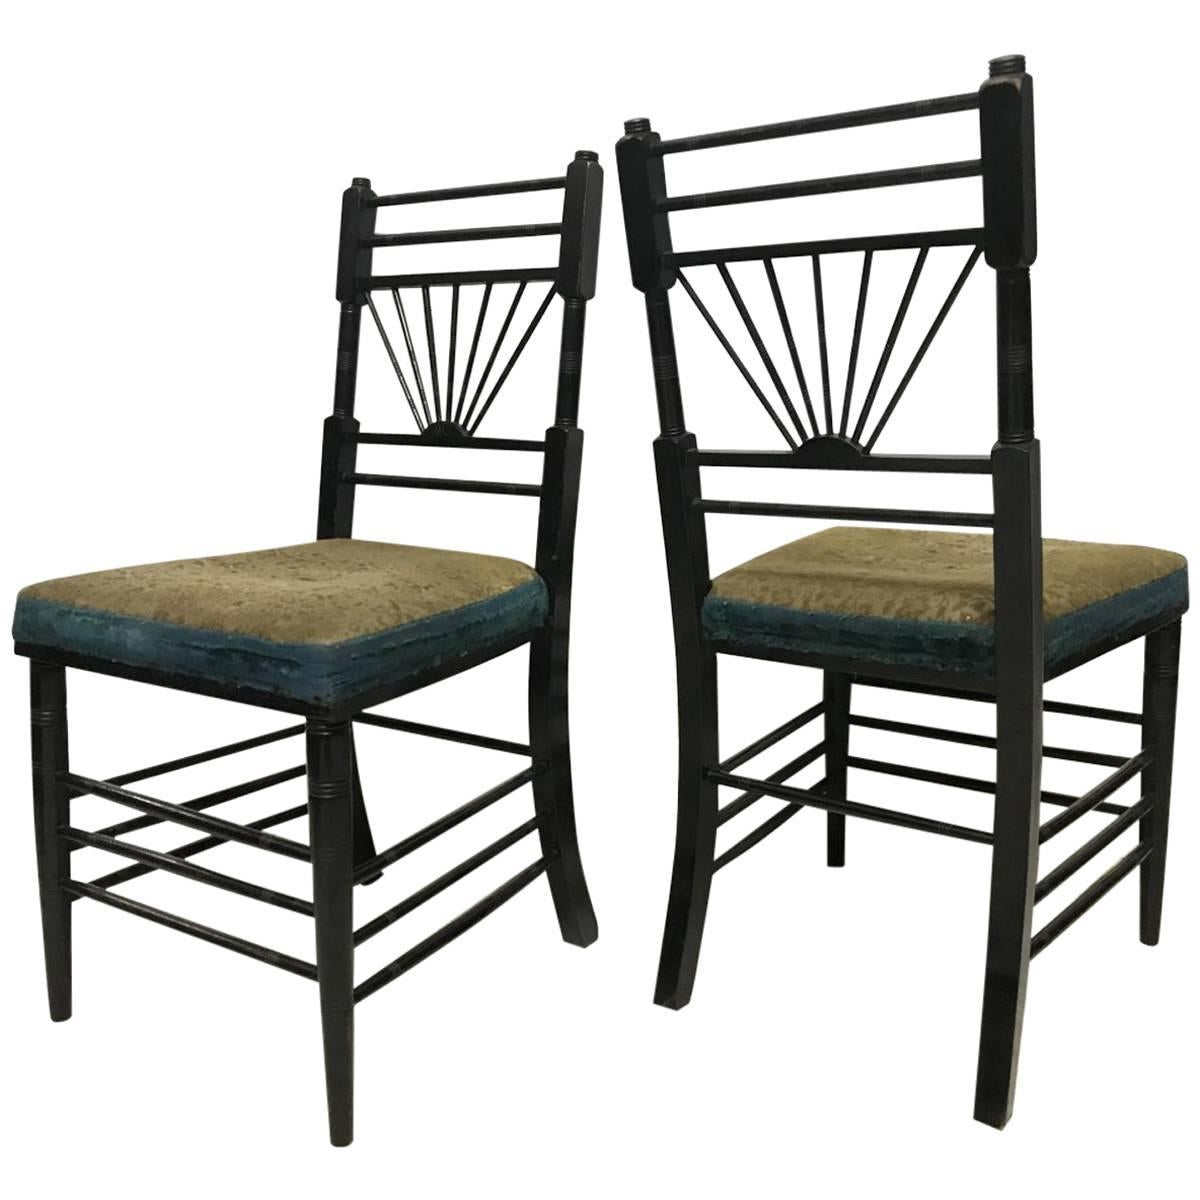 E W Godwin attri, A Pair of Anglo-Japanese Side Chairs with Radiating Spindles